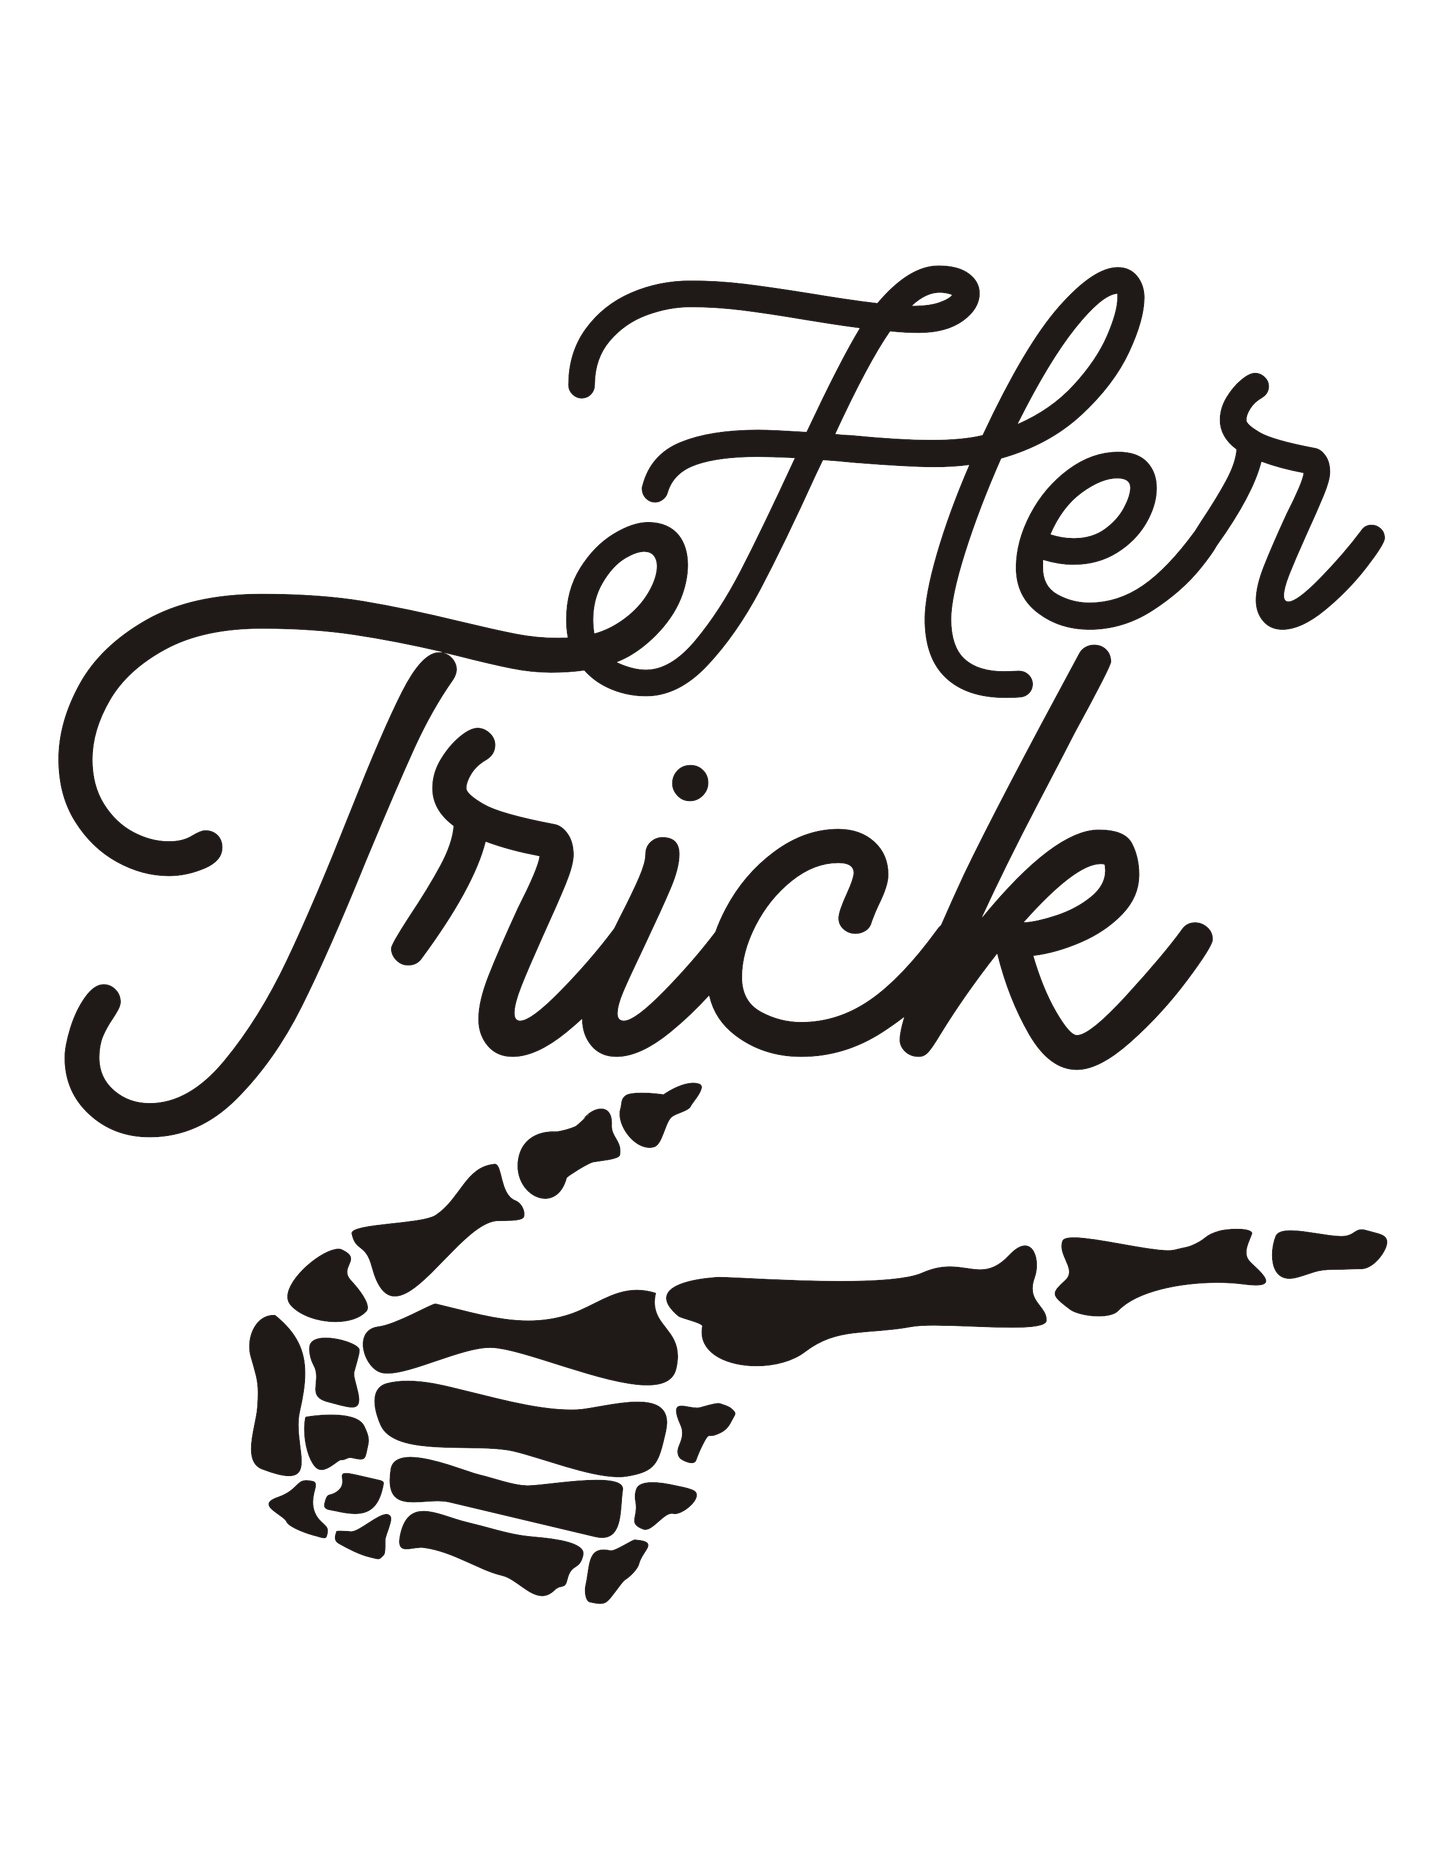 Halloween Couples Her Trick/His Treat Vinyl Graphic for Decals